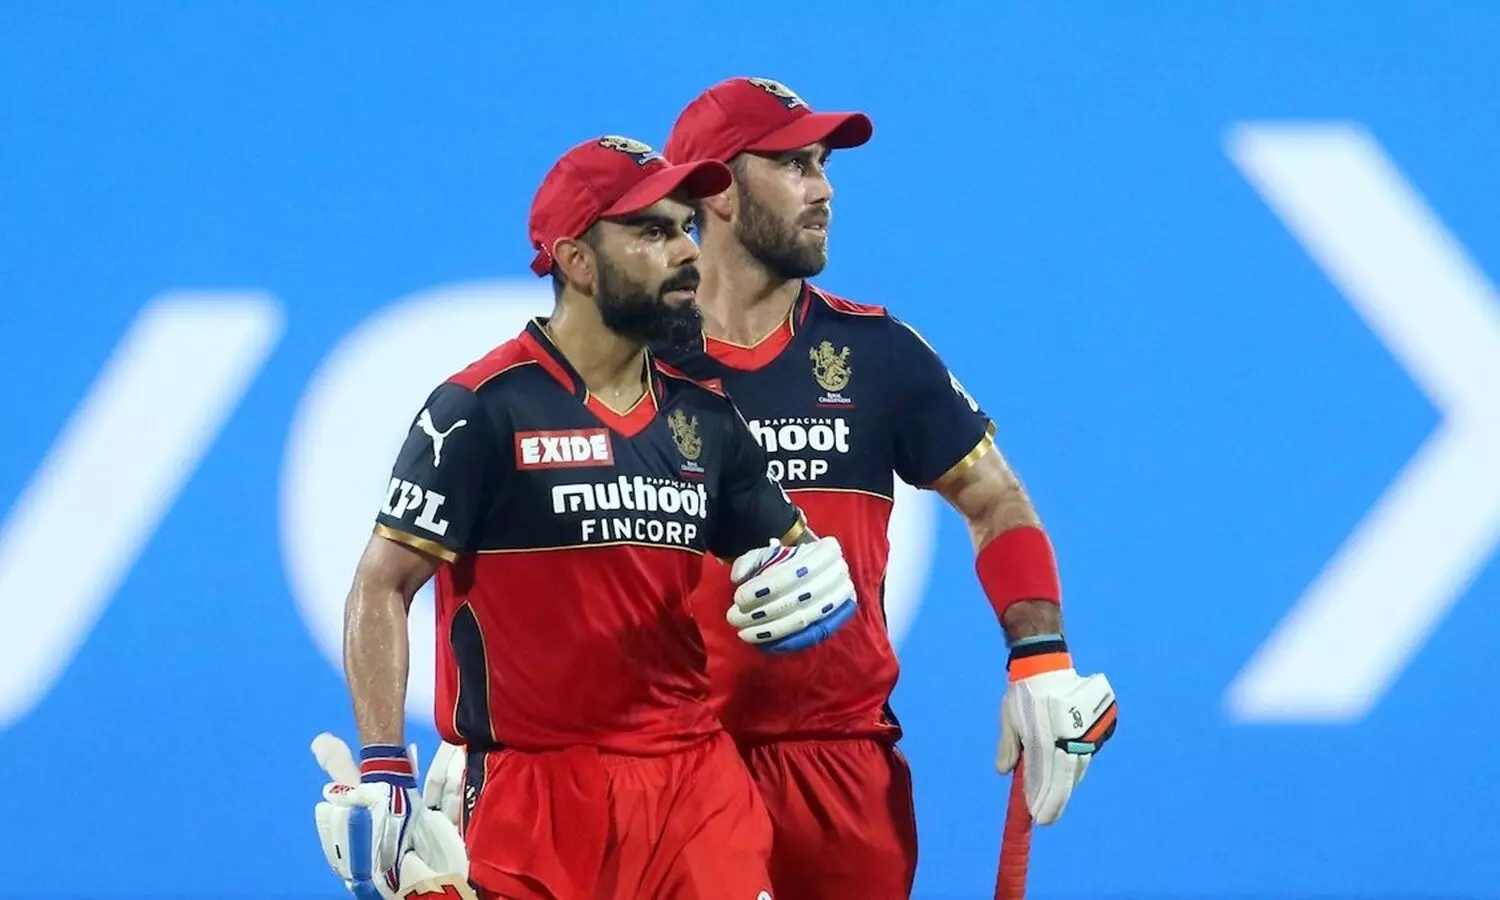 RCB Team 2022 Player List: Complete Royal Challengers Bangalore